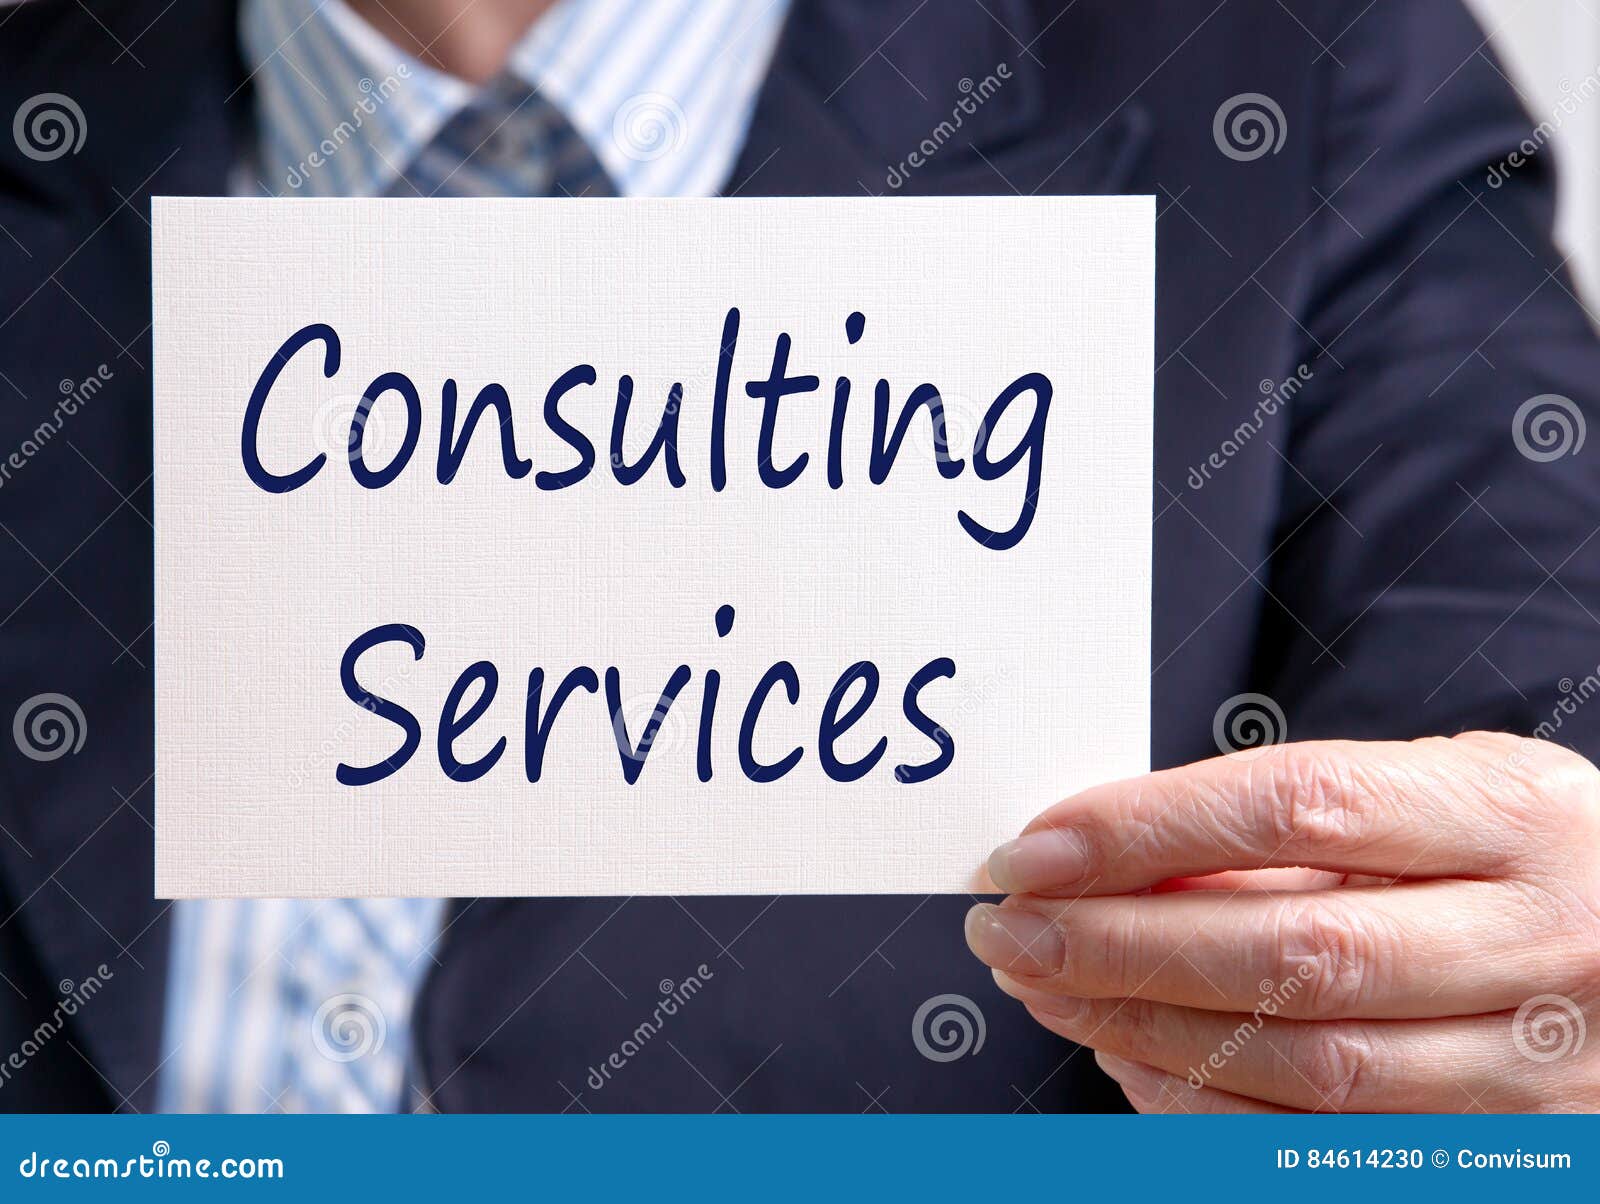 consulting services